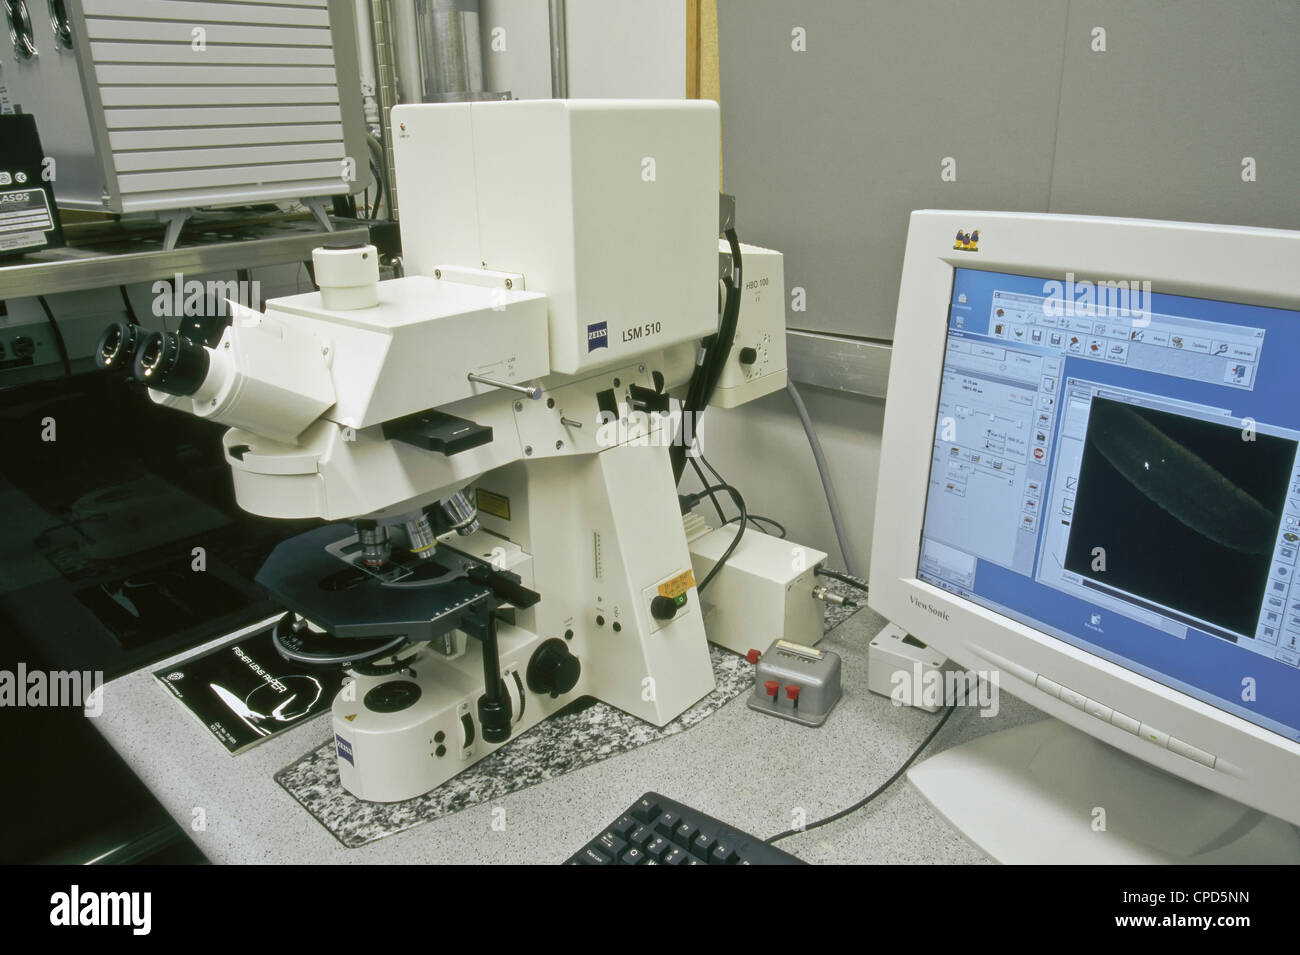 Zeiss LSM510 Laser Scanning Confocal Microscope. Stock Photo